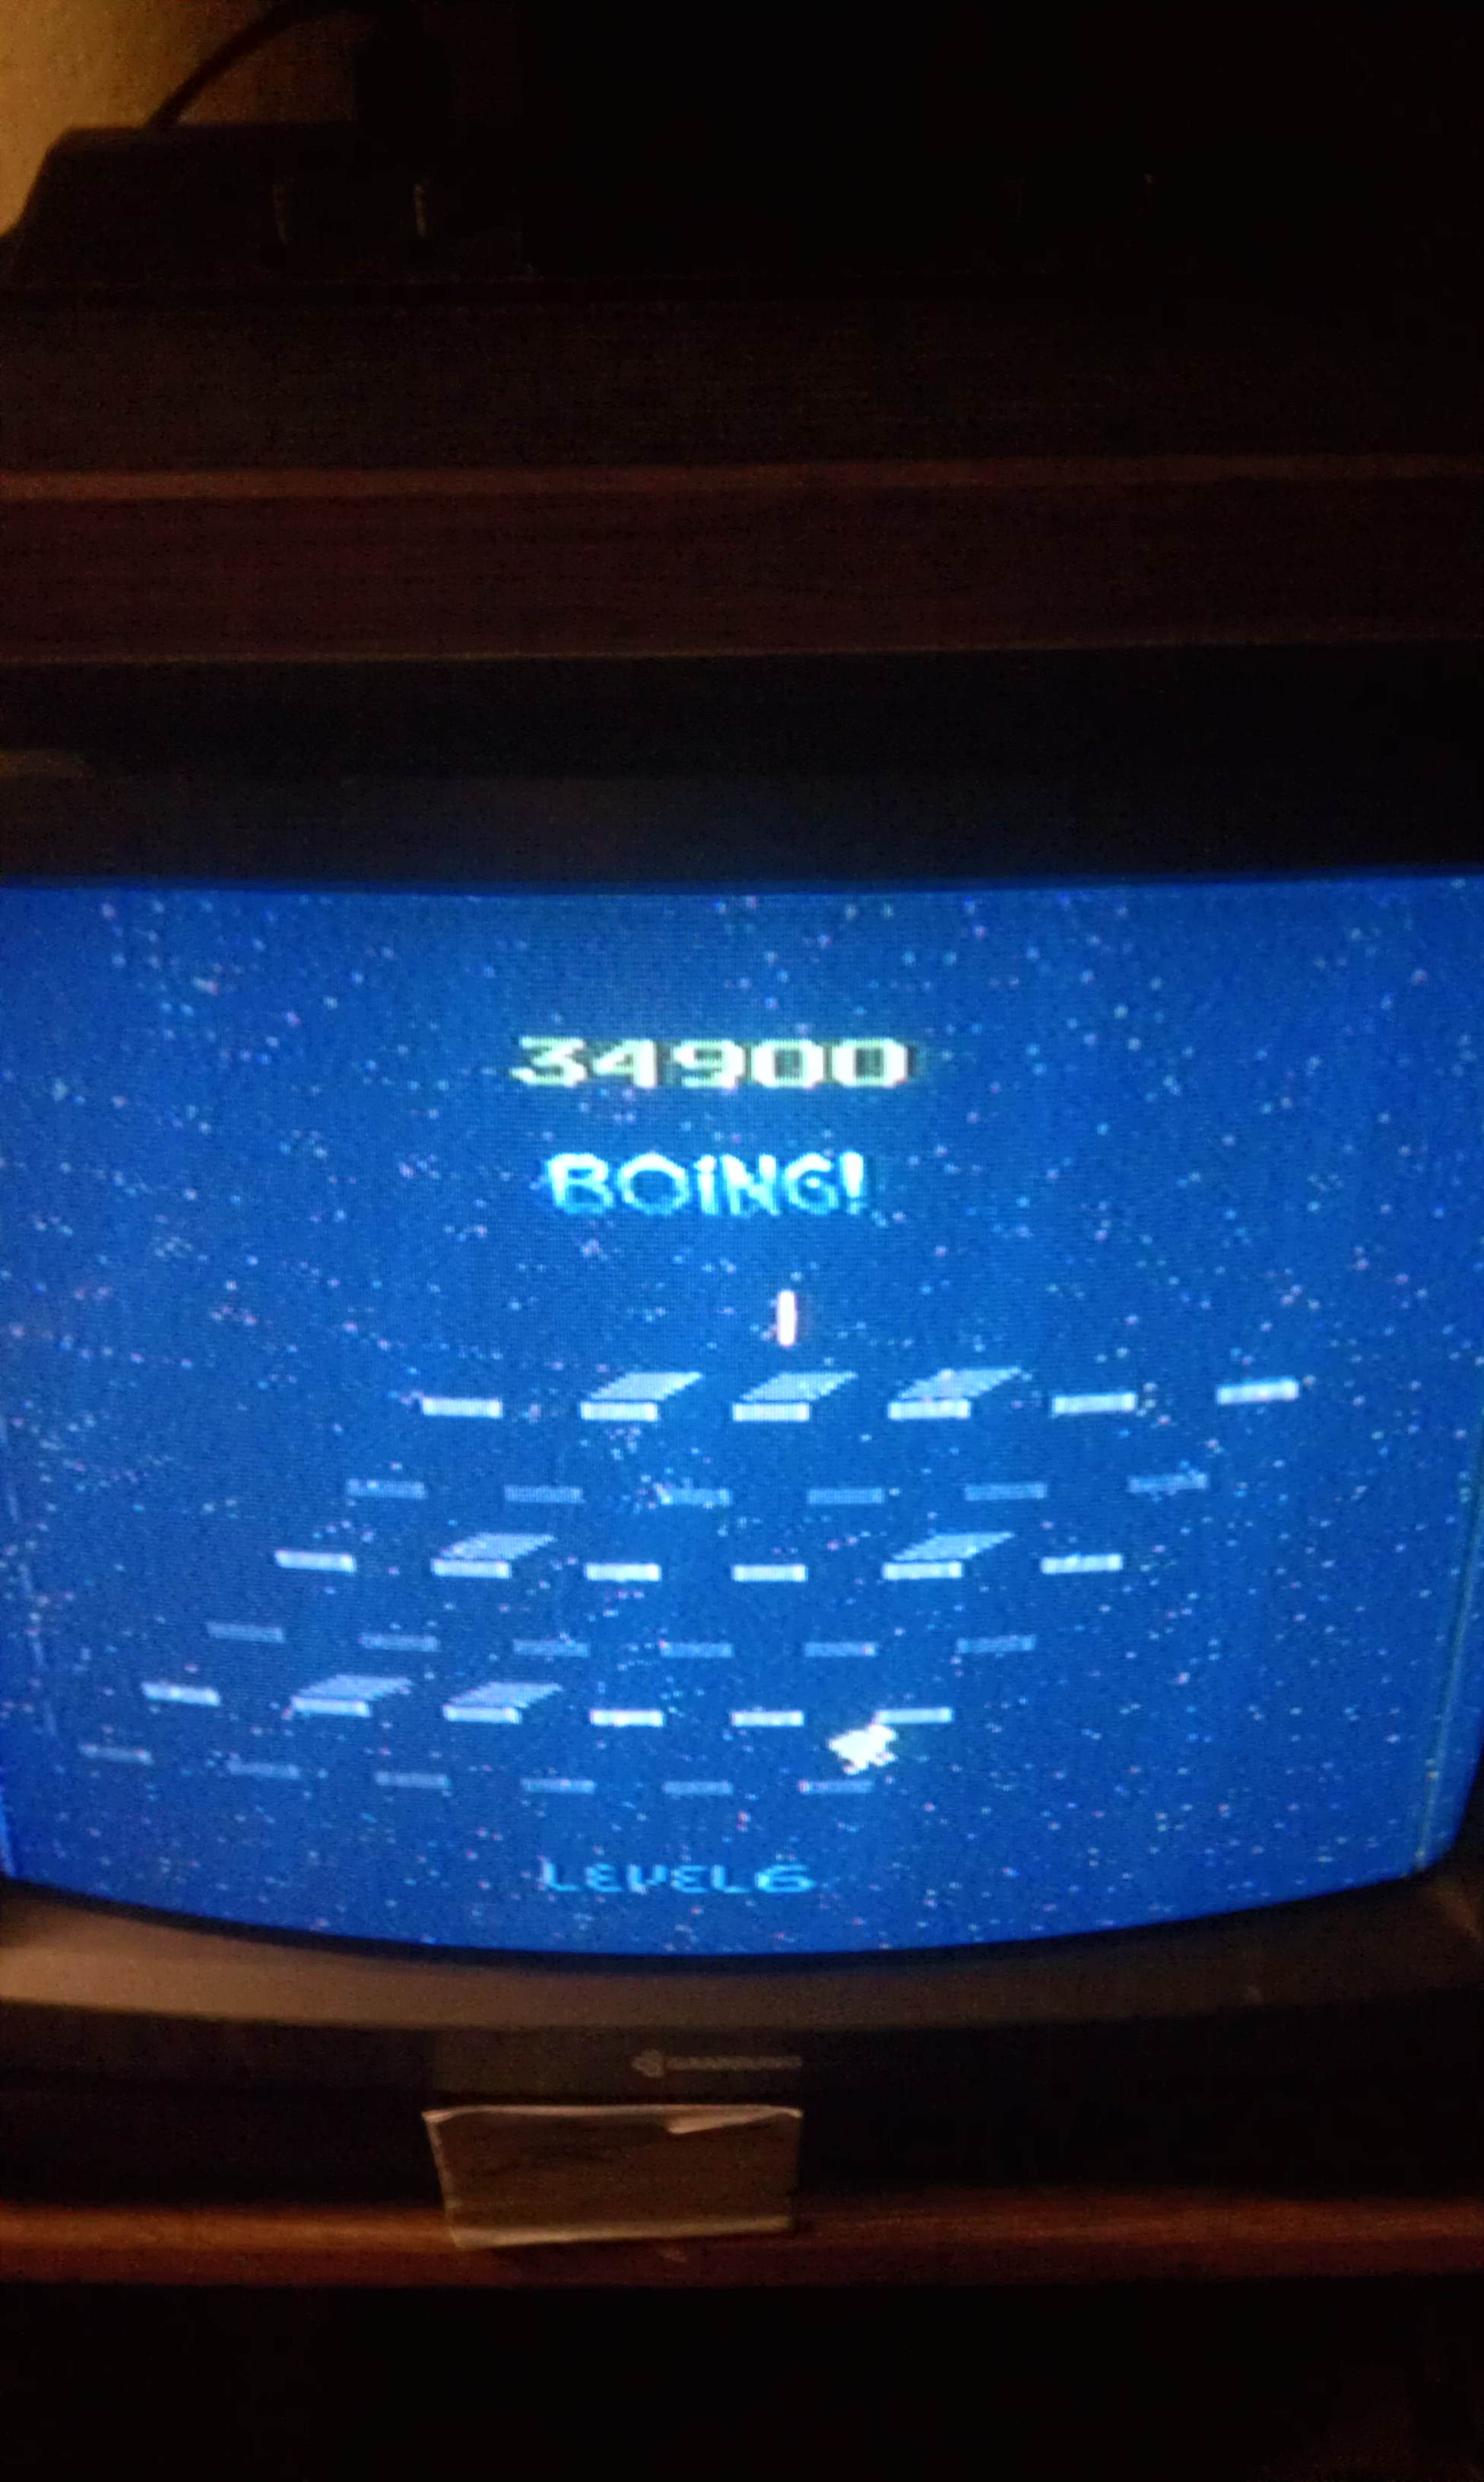 Boing! 34,900 points